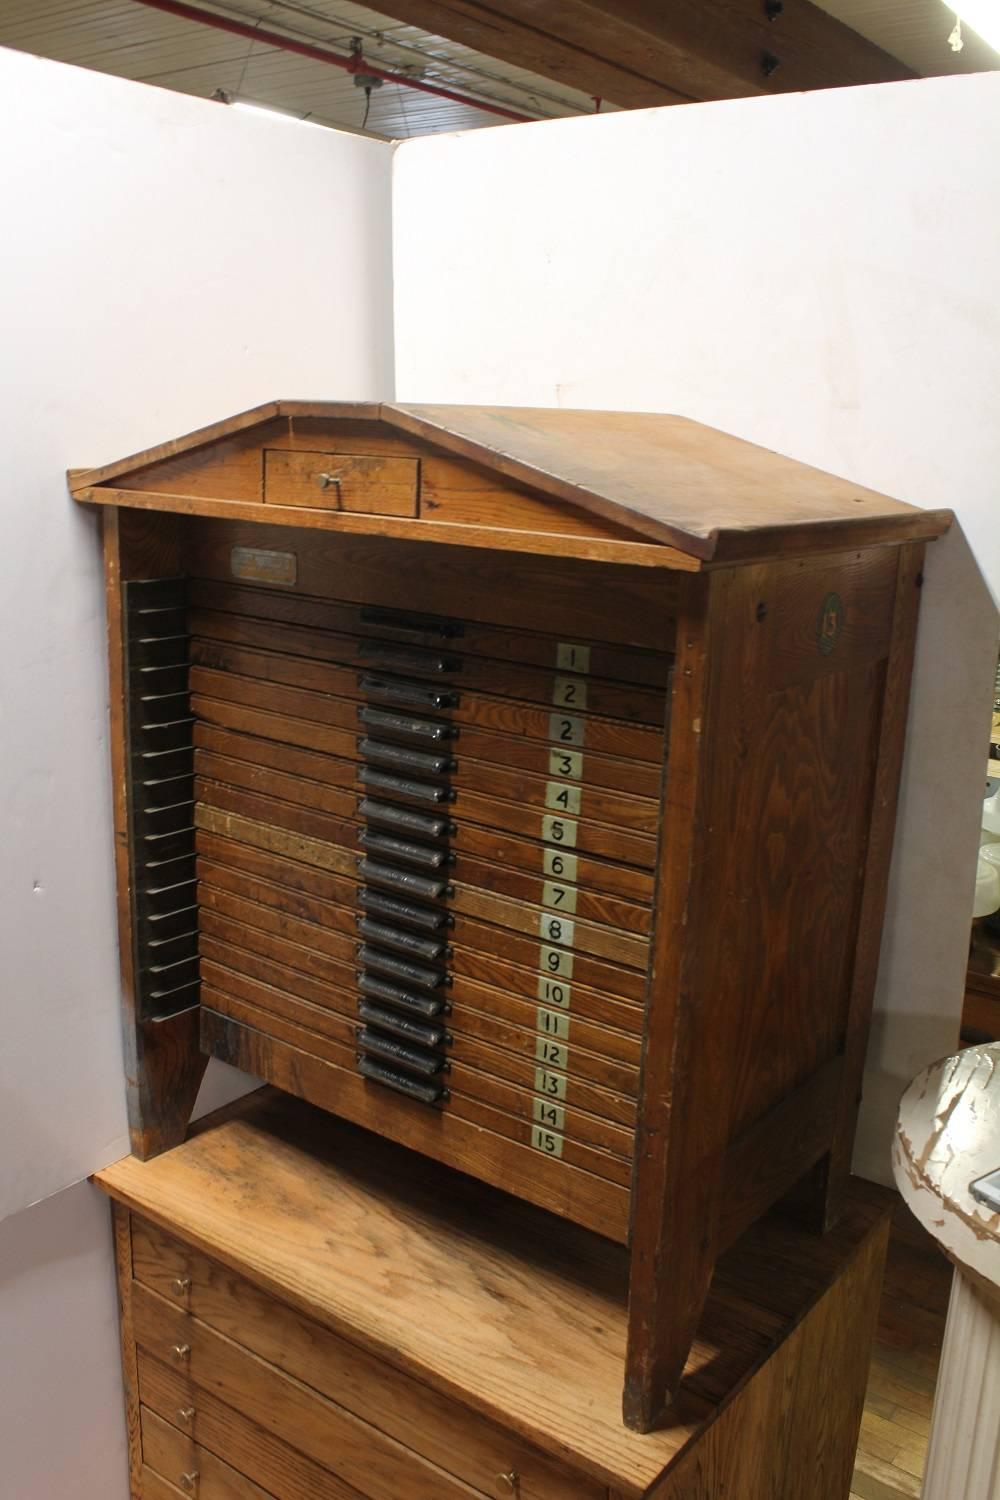 Unusual printers wood table/cabinet by Hamilton.